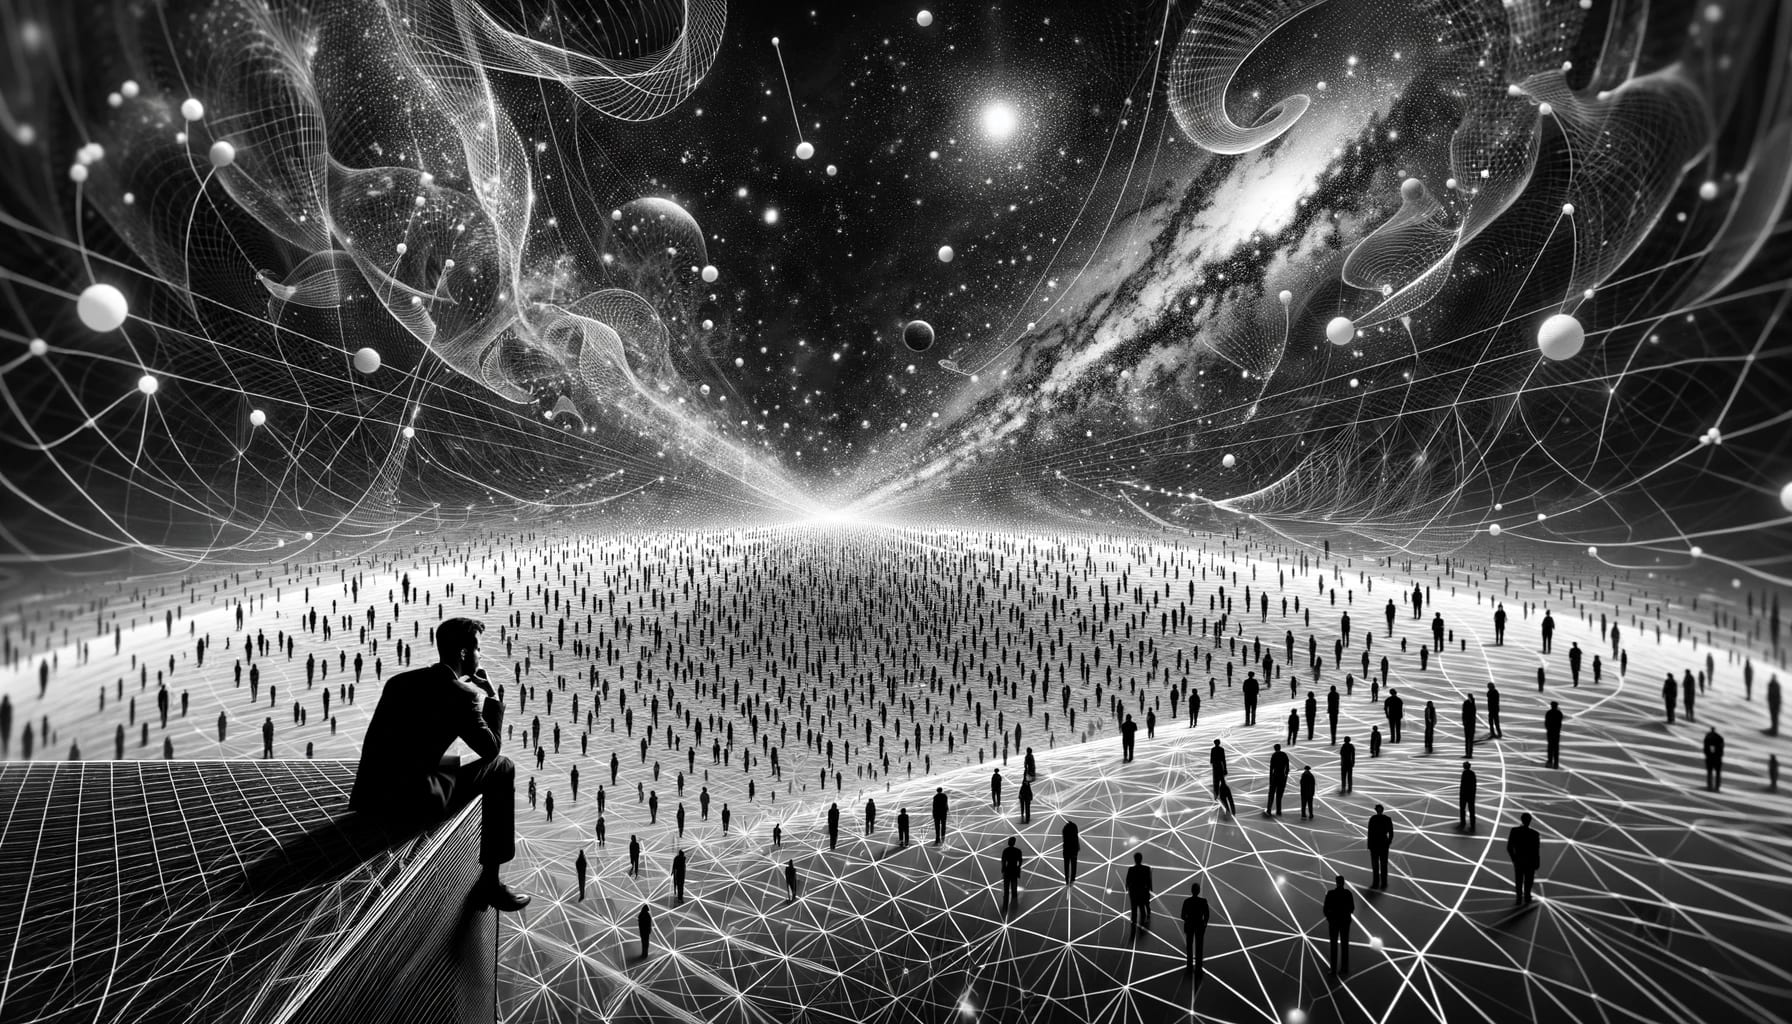 Create a surreal, black and white banner-like image of an agent deciding how to act in an infinitely large lattice-universe with infinitely many people. The agent should be portrayed as thoughtful and contemplative in the center of a vast, lattice-structured universe. This lattice, symbolizing infinity, should be populated with numerous small figures to represent the countless people. The image should have a surreal quality, with abstract patterns and shapes seamlessly integrated into the lattice. The panoramic, banner-style format should enhance the sense of vastness and complexity, emphasizing the enormity of the decision-making process in such an expansive and structured universe.